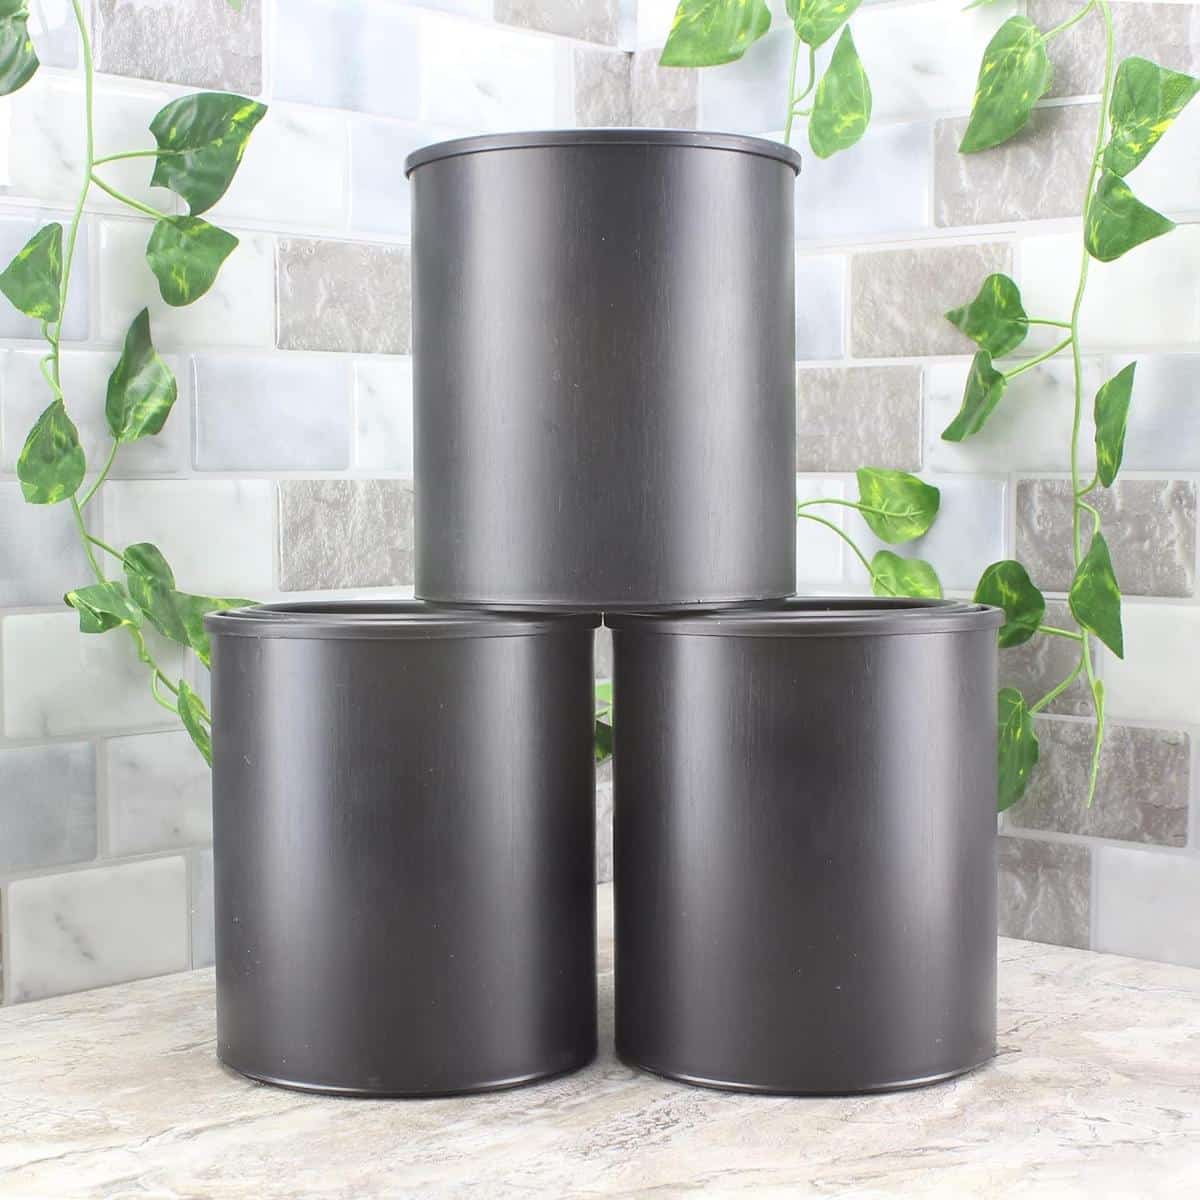 Storage Cans for Crafts